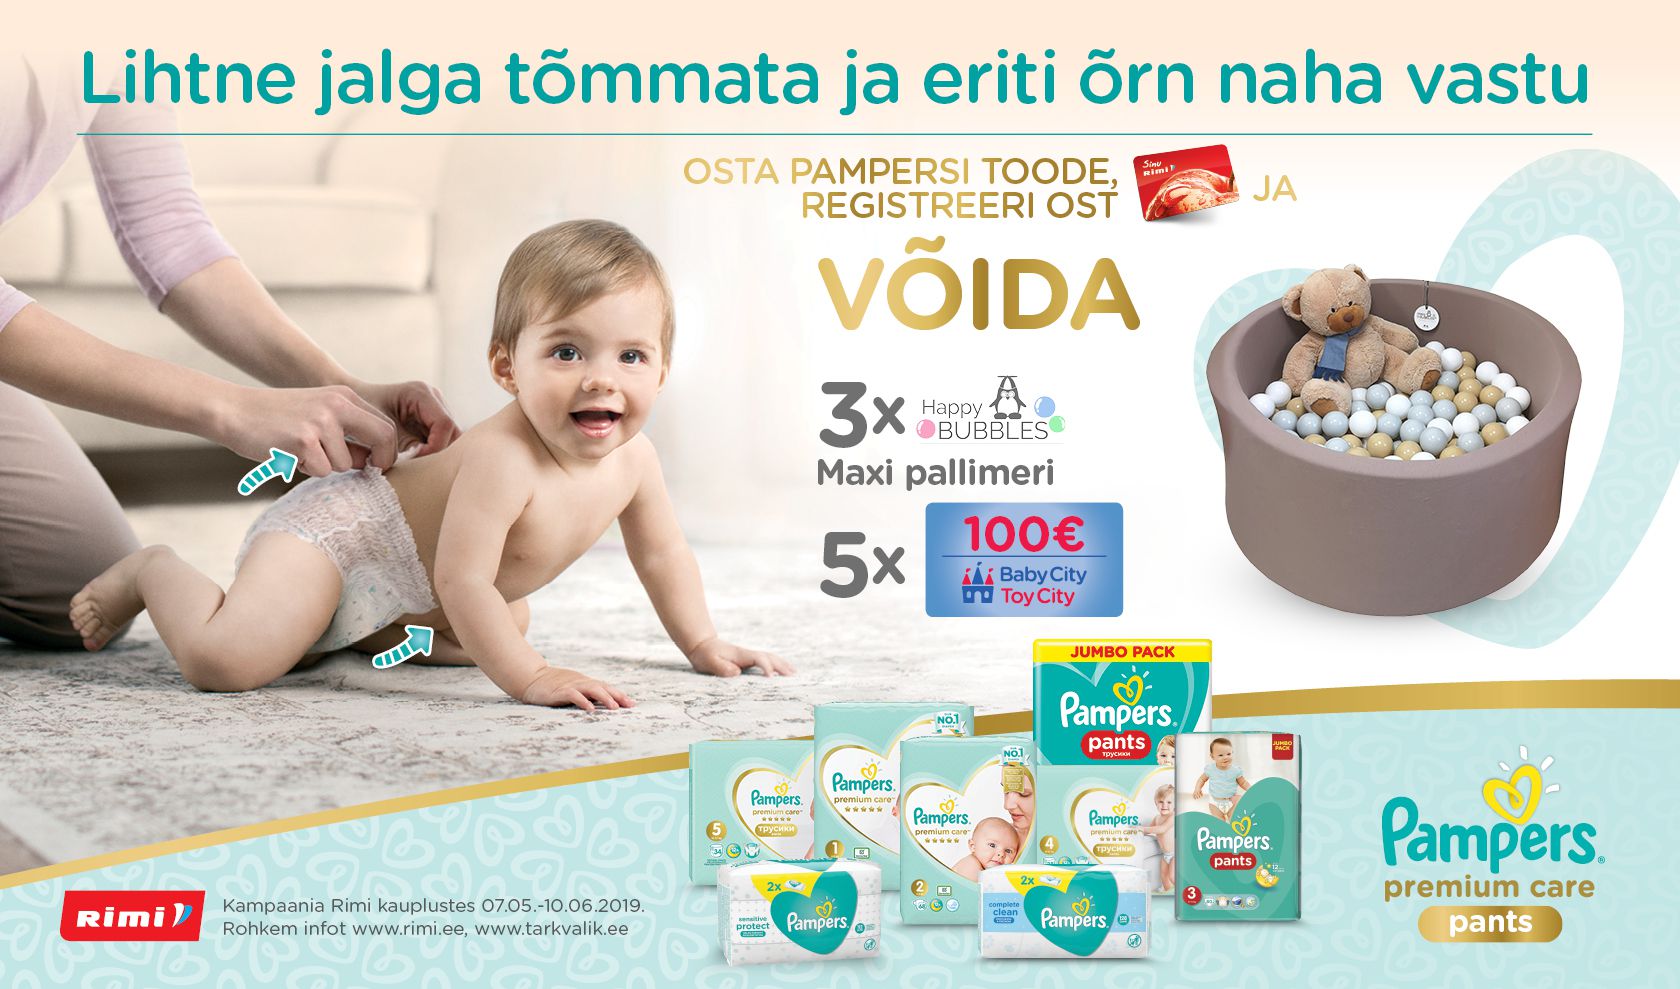 Pampers RIMI 2019